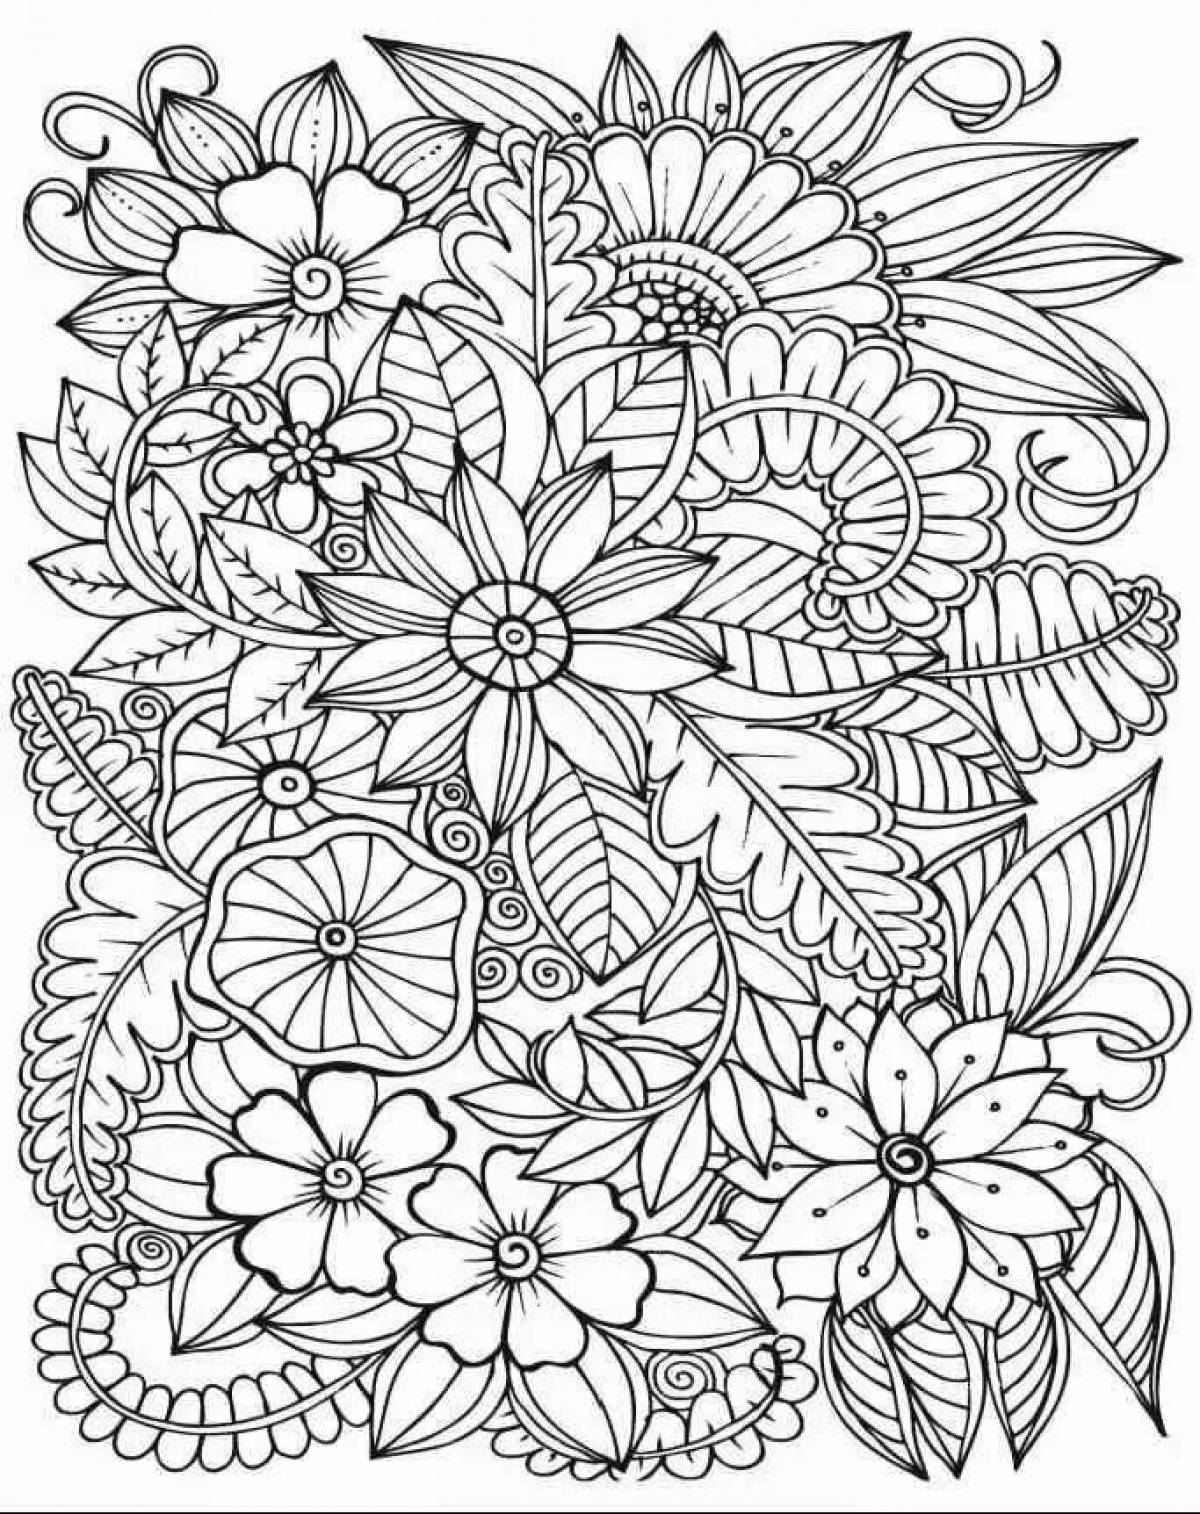 Soothing coloring flowers antistress